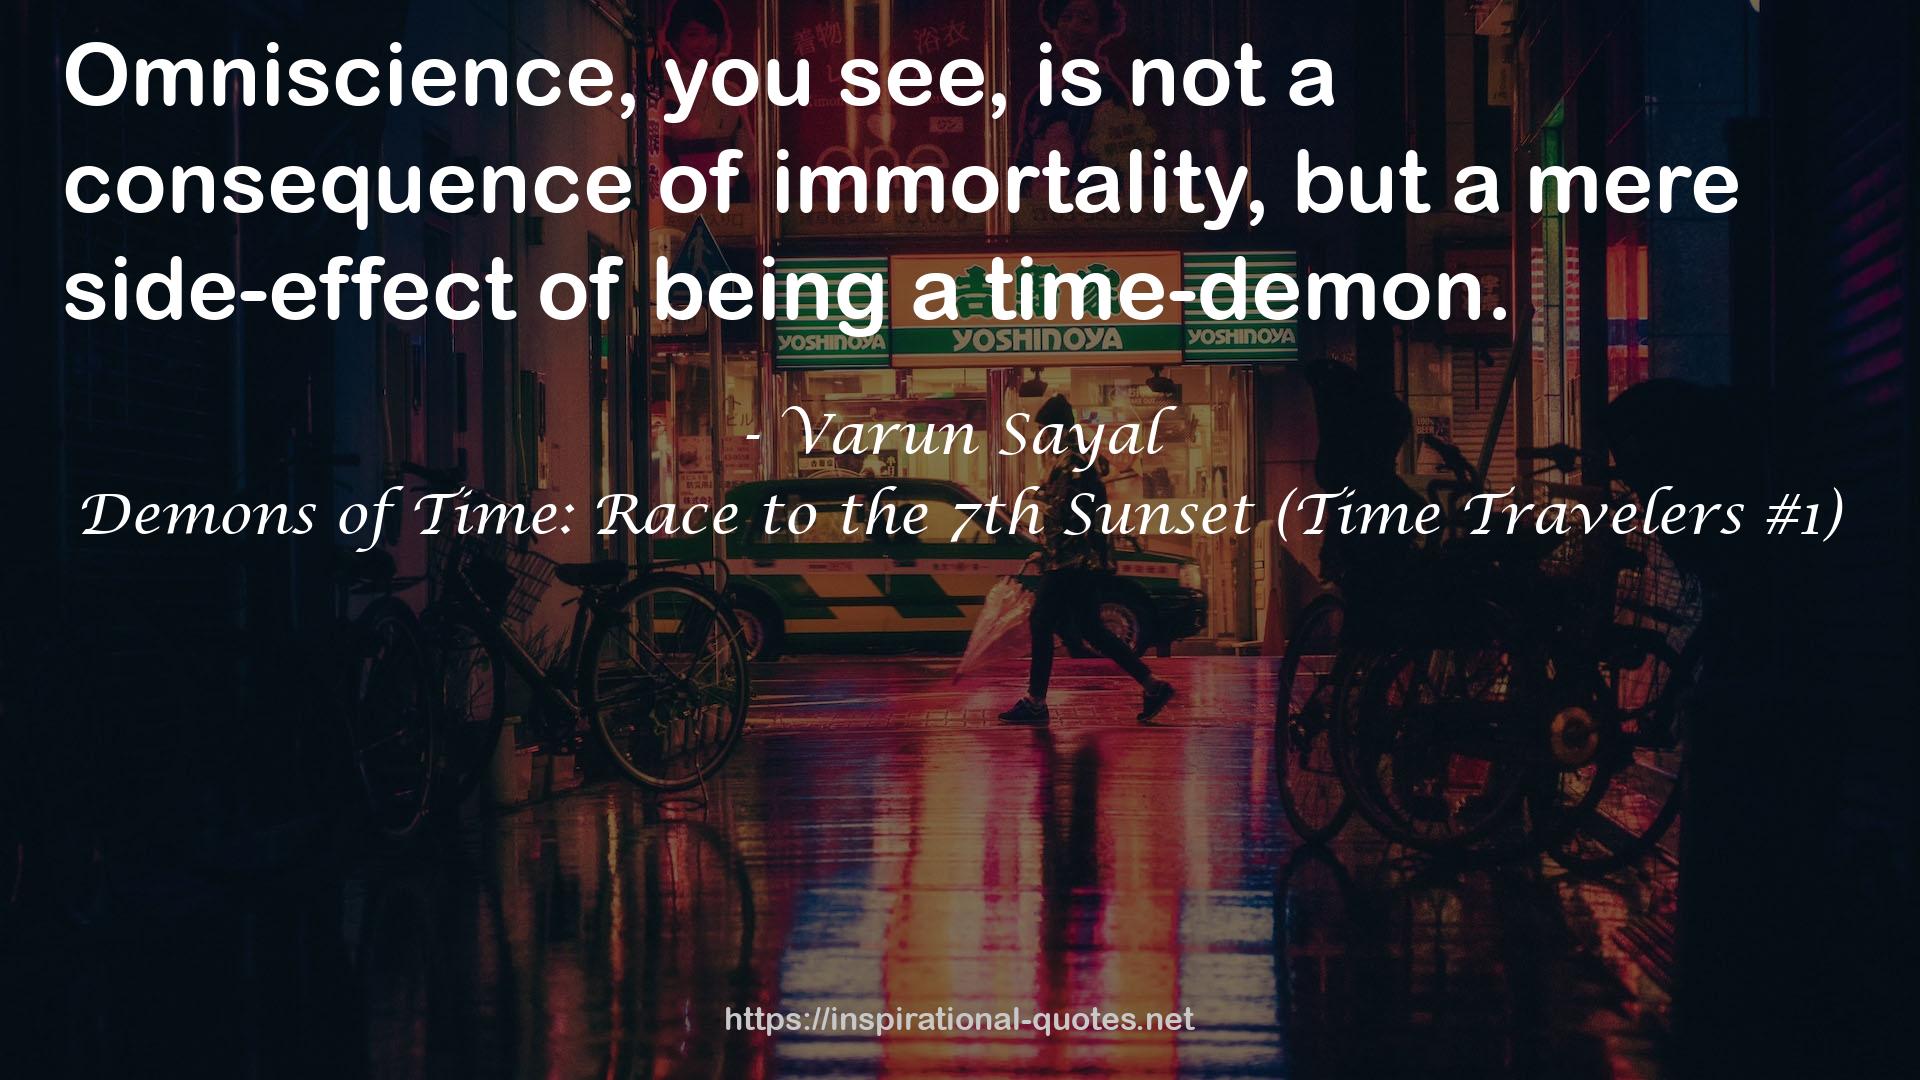 Demons of Time: Race to the 7th Sunset (Time Travelers #1) QUOTES